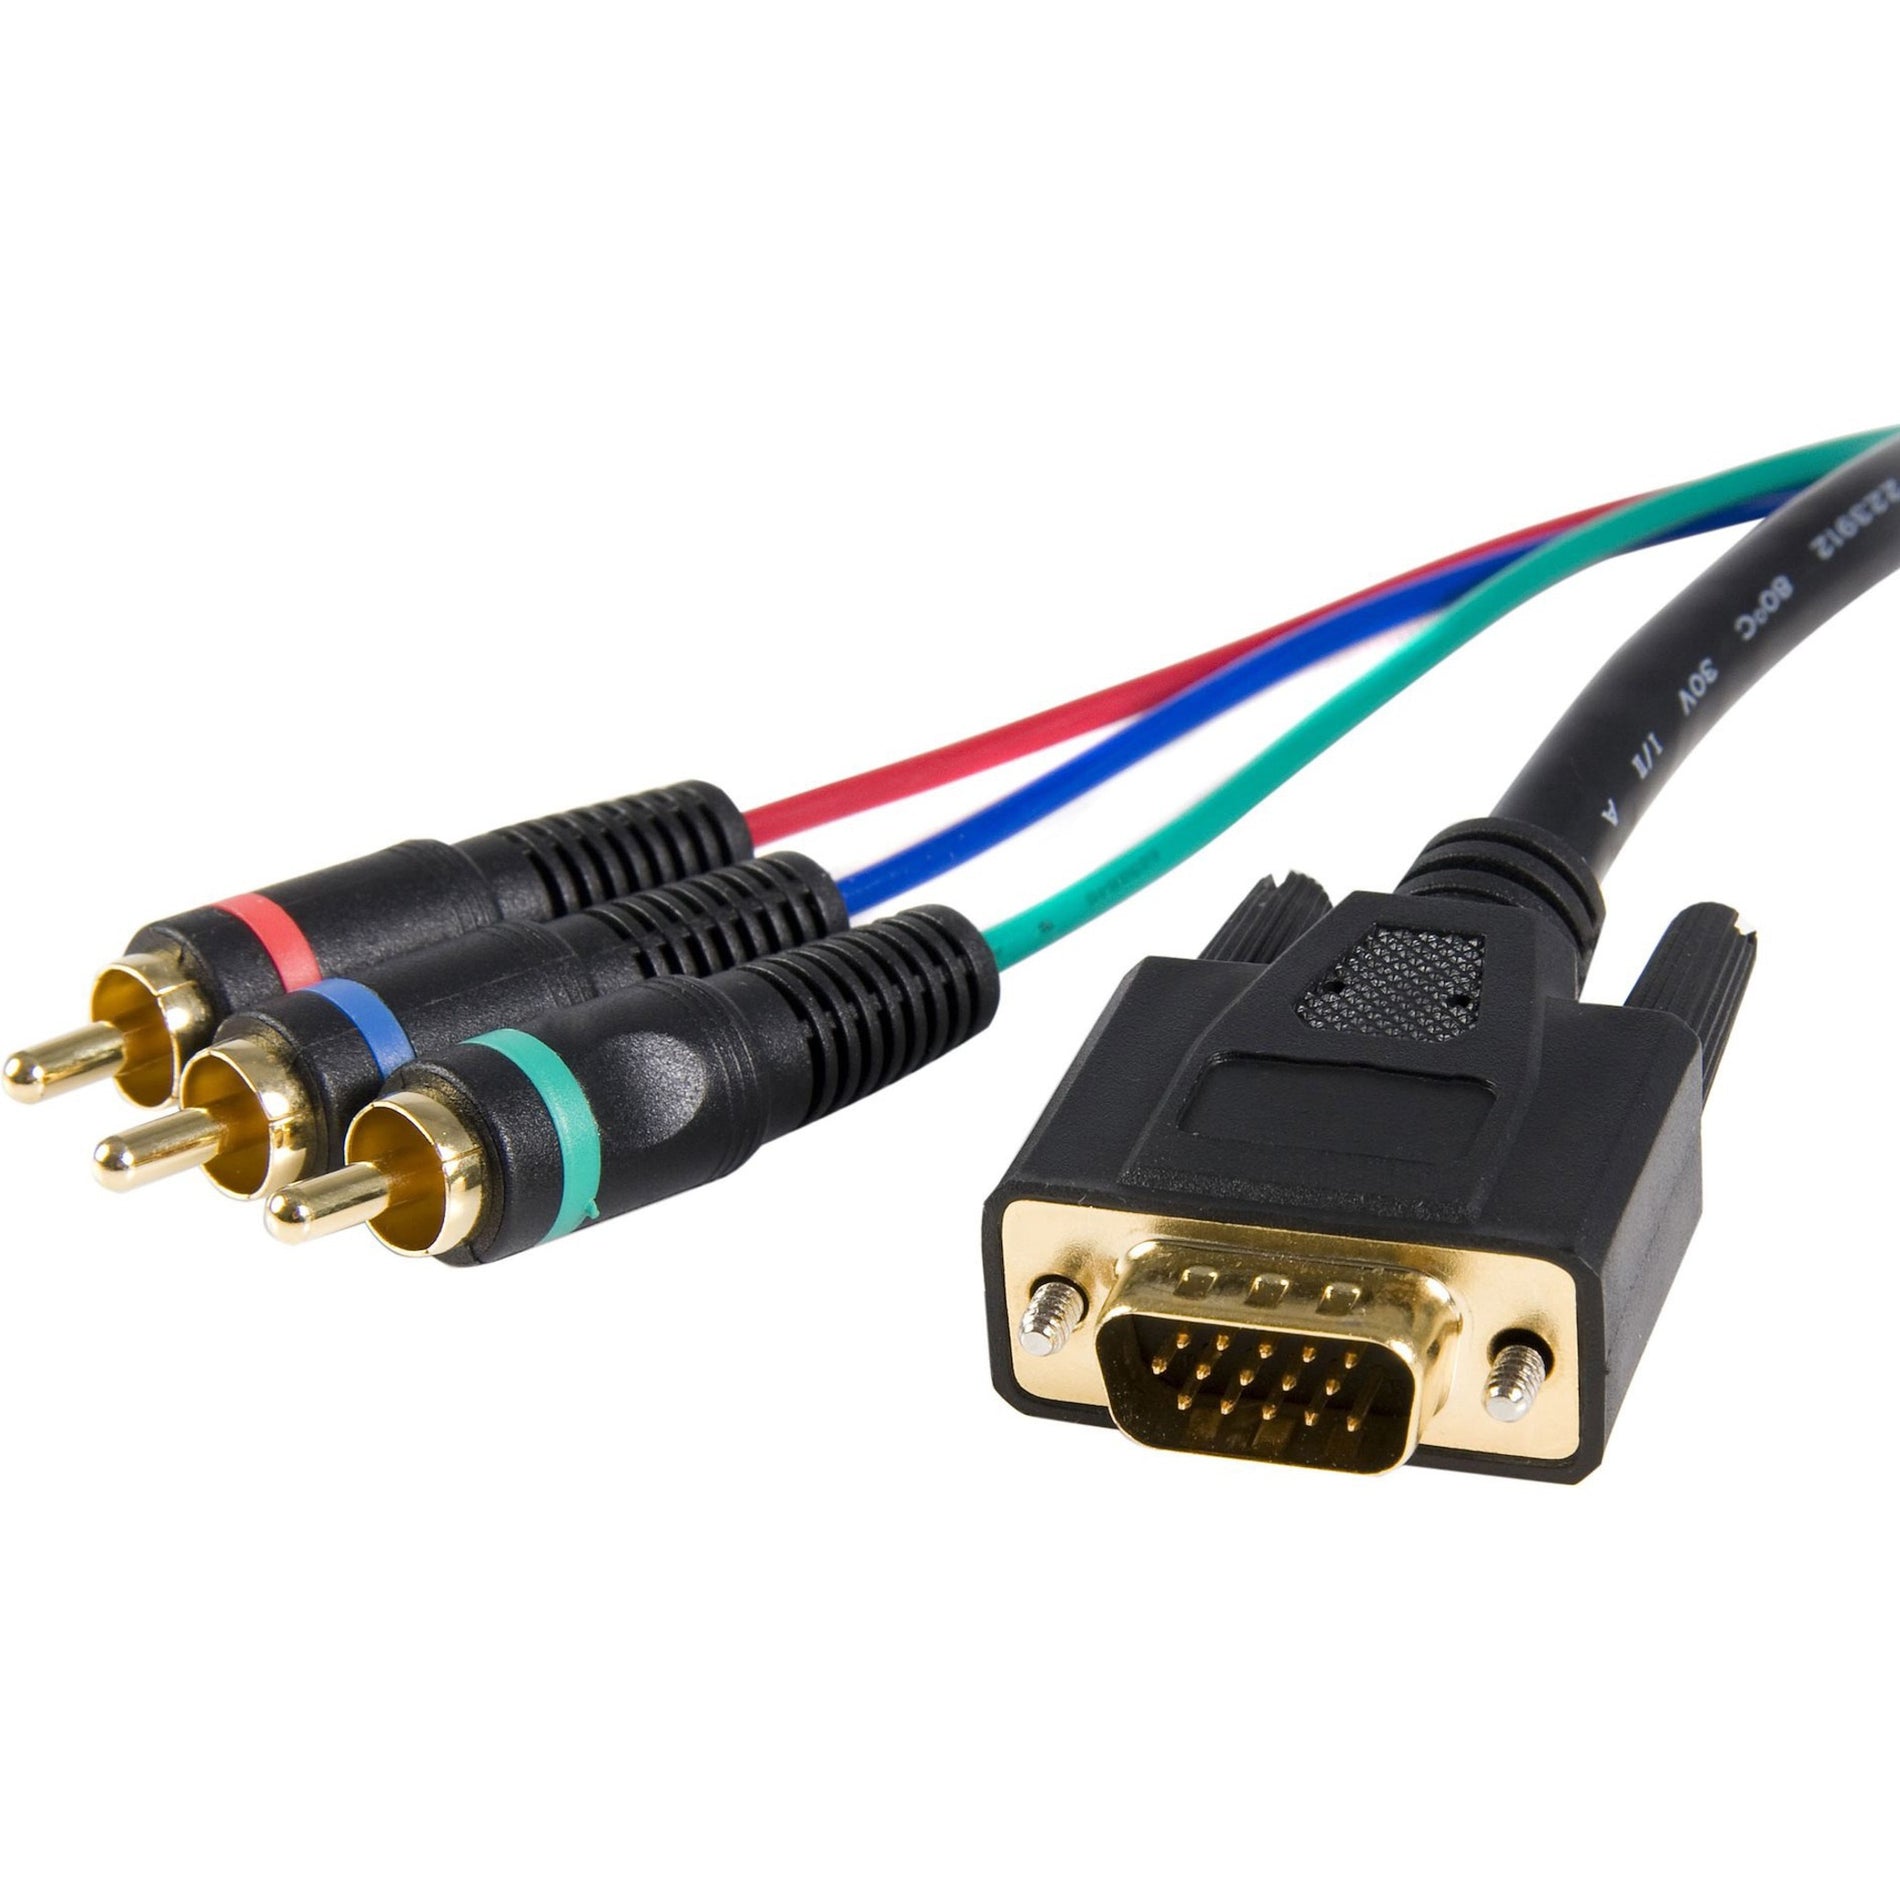 StarTech.com HD15CPNTMM3 Cable Adapter - RCA Breakout - HD15 (m) - Component (f) - 3 ft, Video Cable [Discontinued]